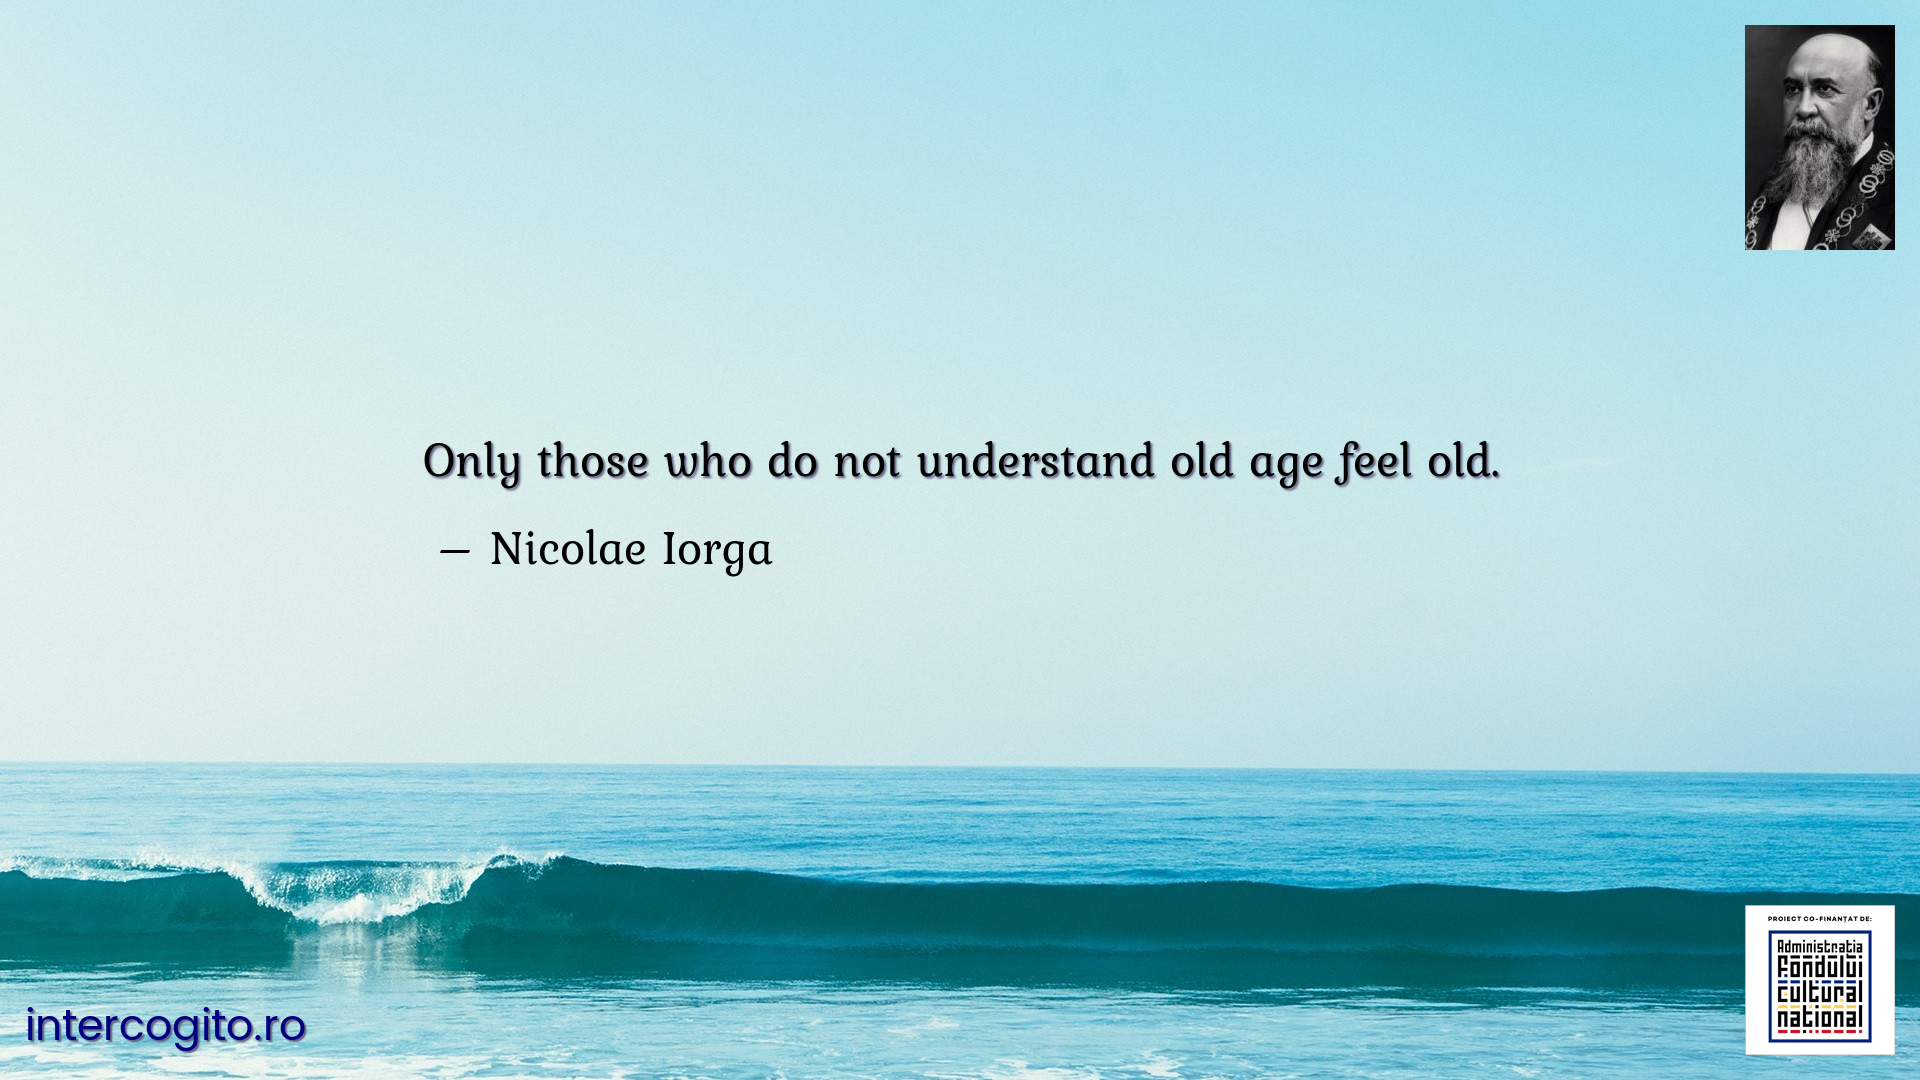 Only those who do not understand old age feel old.